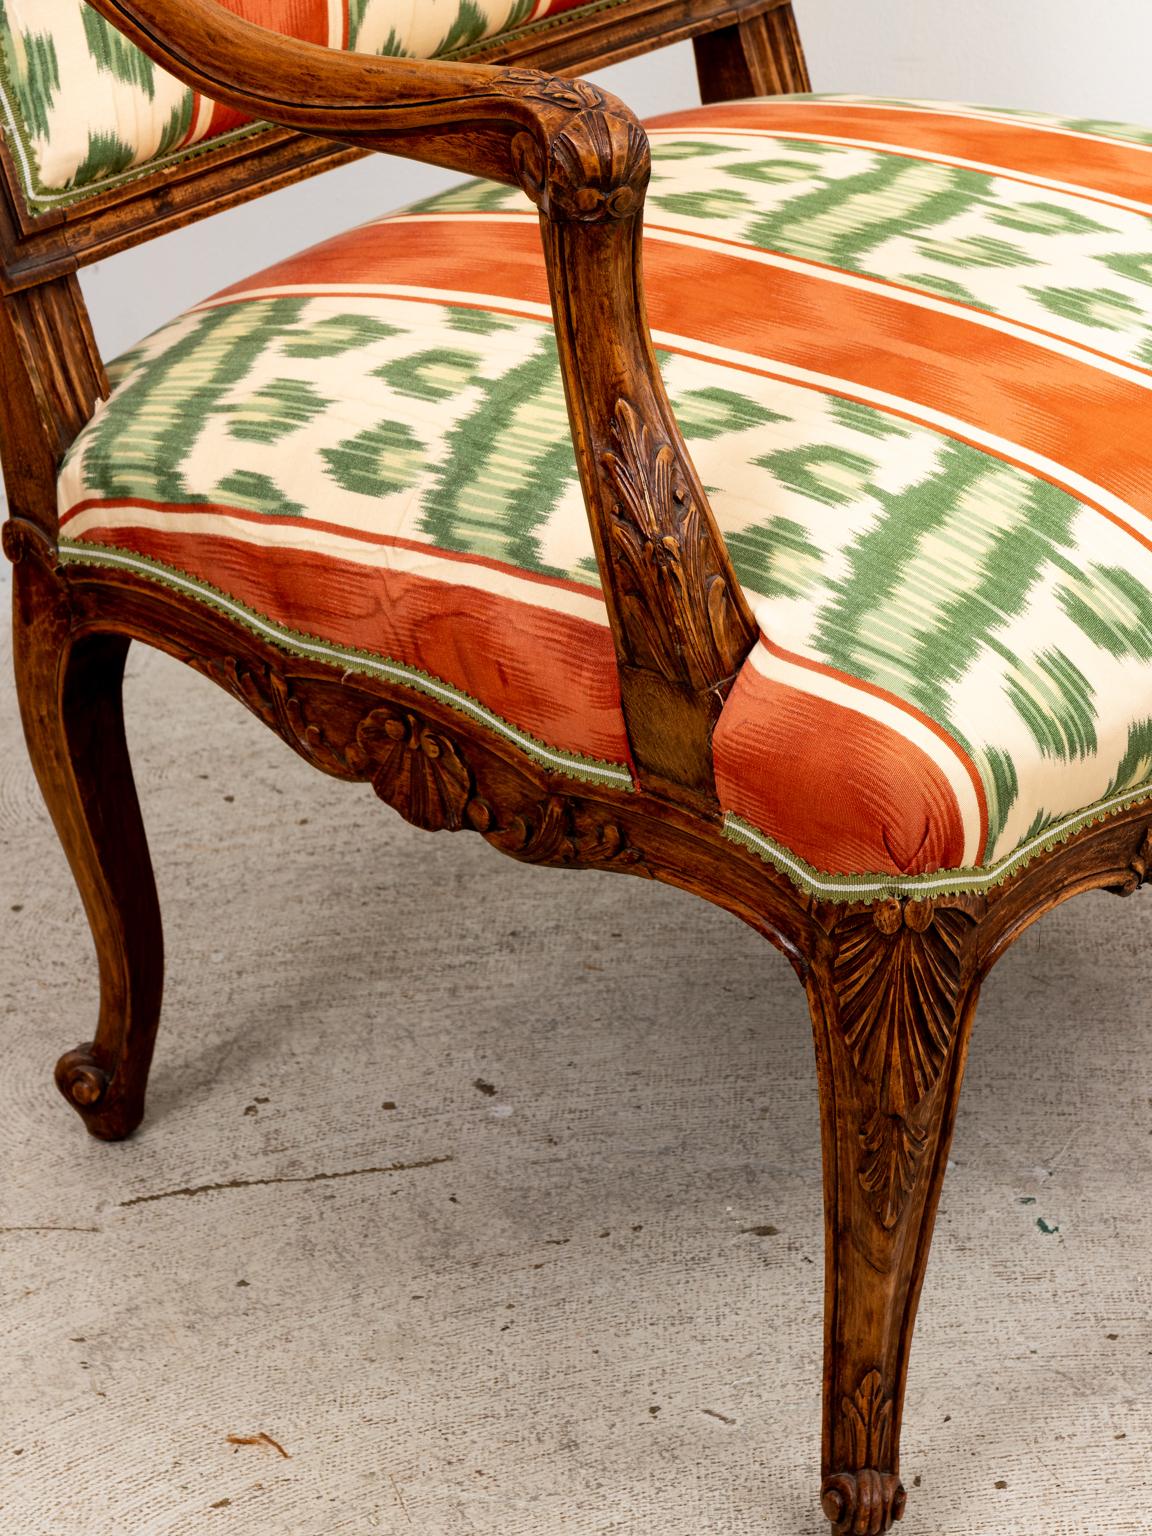 Pair of upholstered Continental style open armchairs on cabriole legs with carved scrolled foliage as seen on the seat apron. Please note of wear consistent with age including finish loss and minor chips.